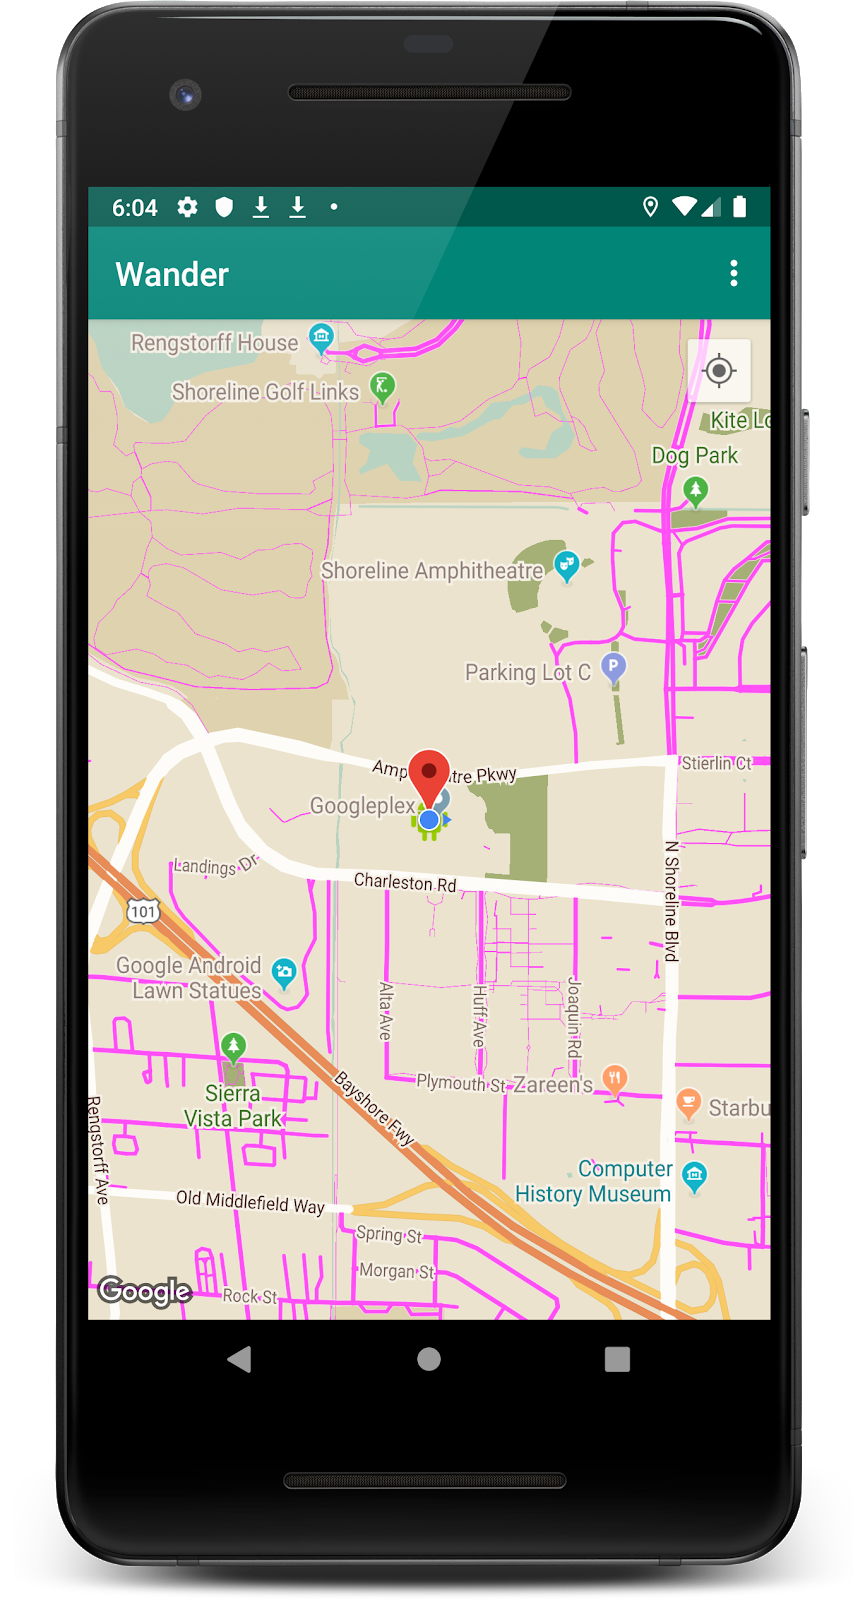 Google Maps App Android Advanced Android in Kotlin 04.1: Android Google Maps